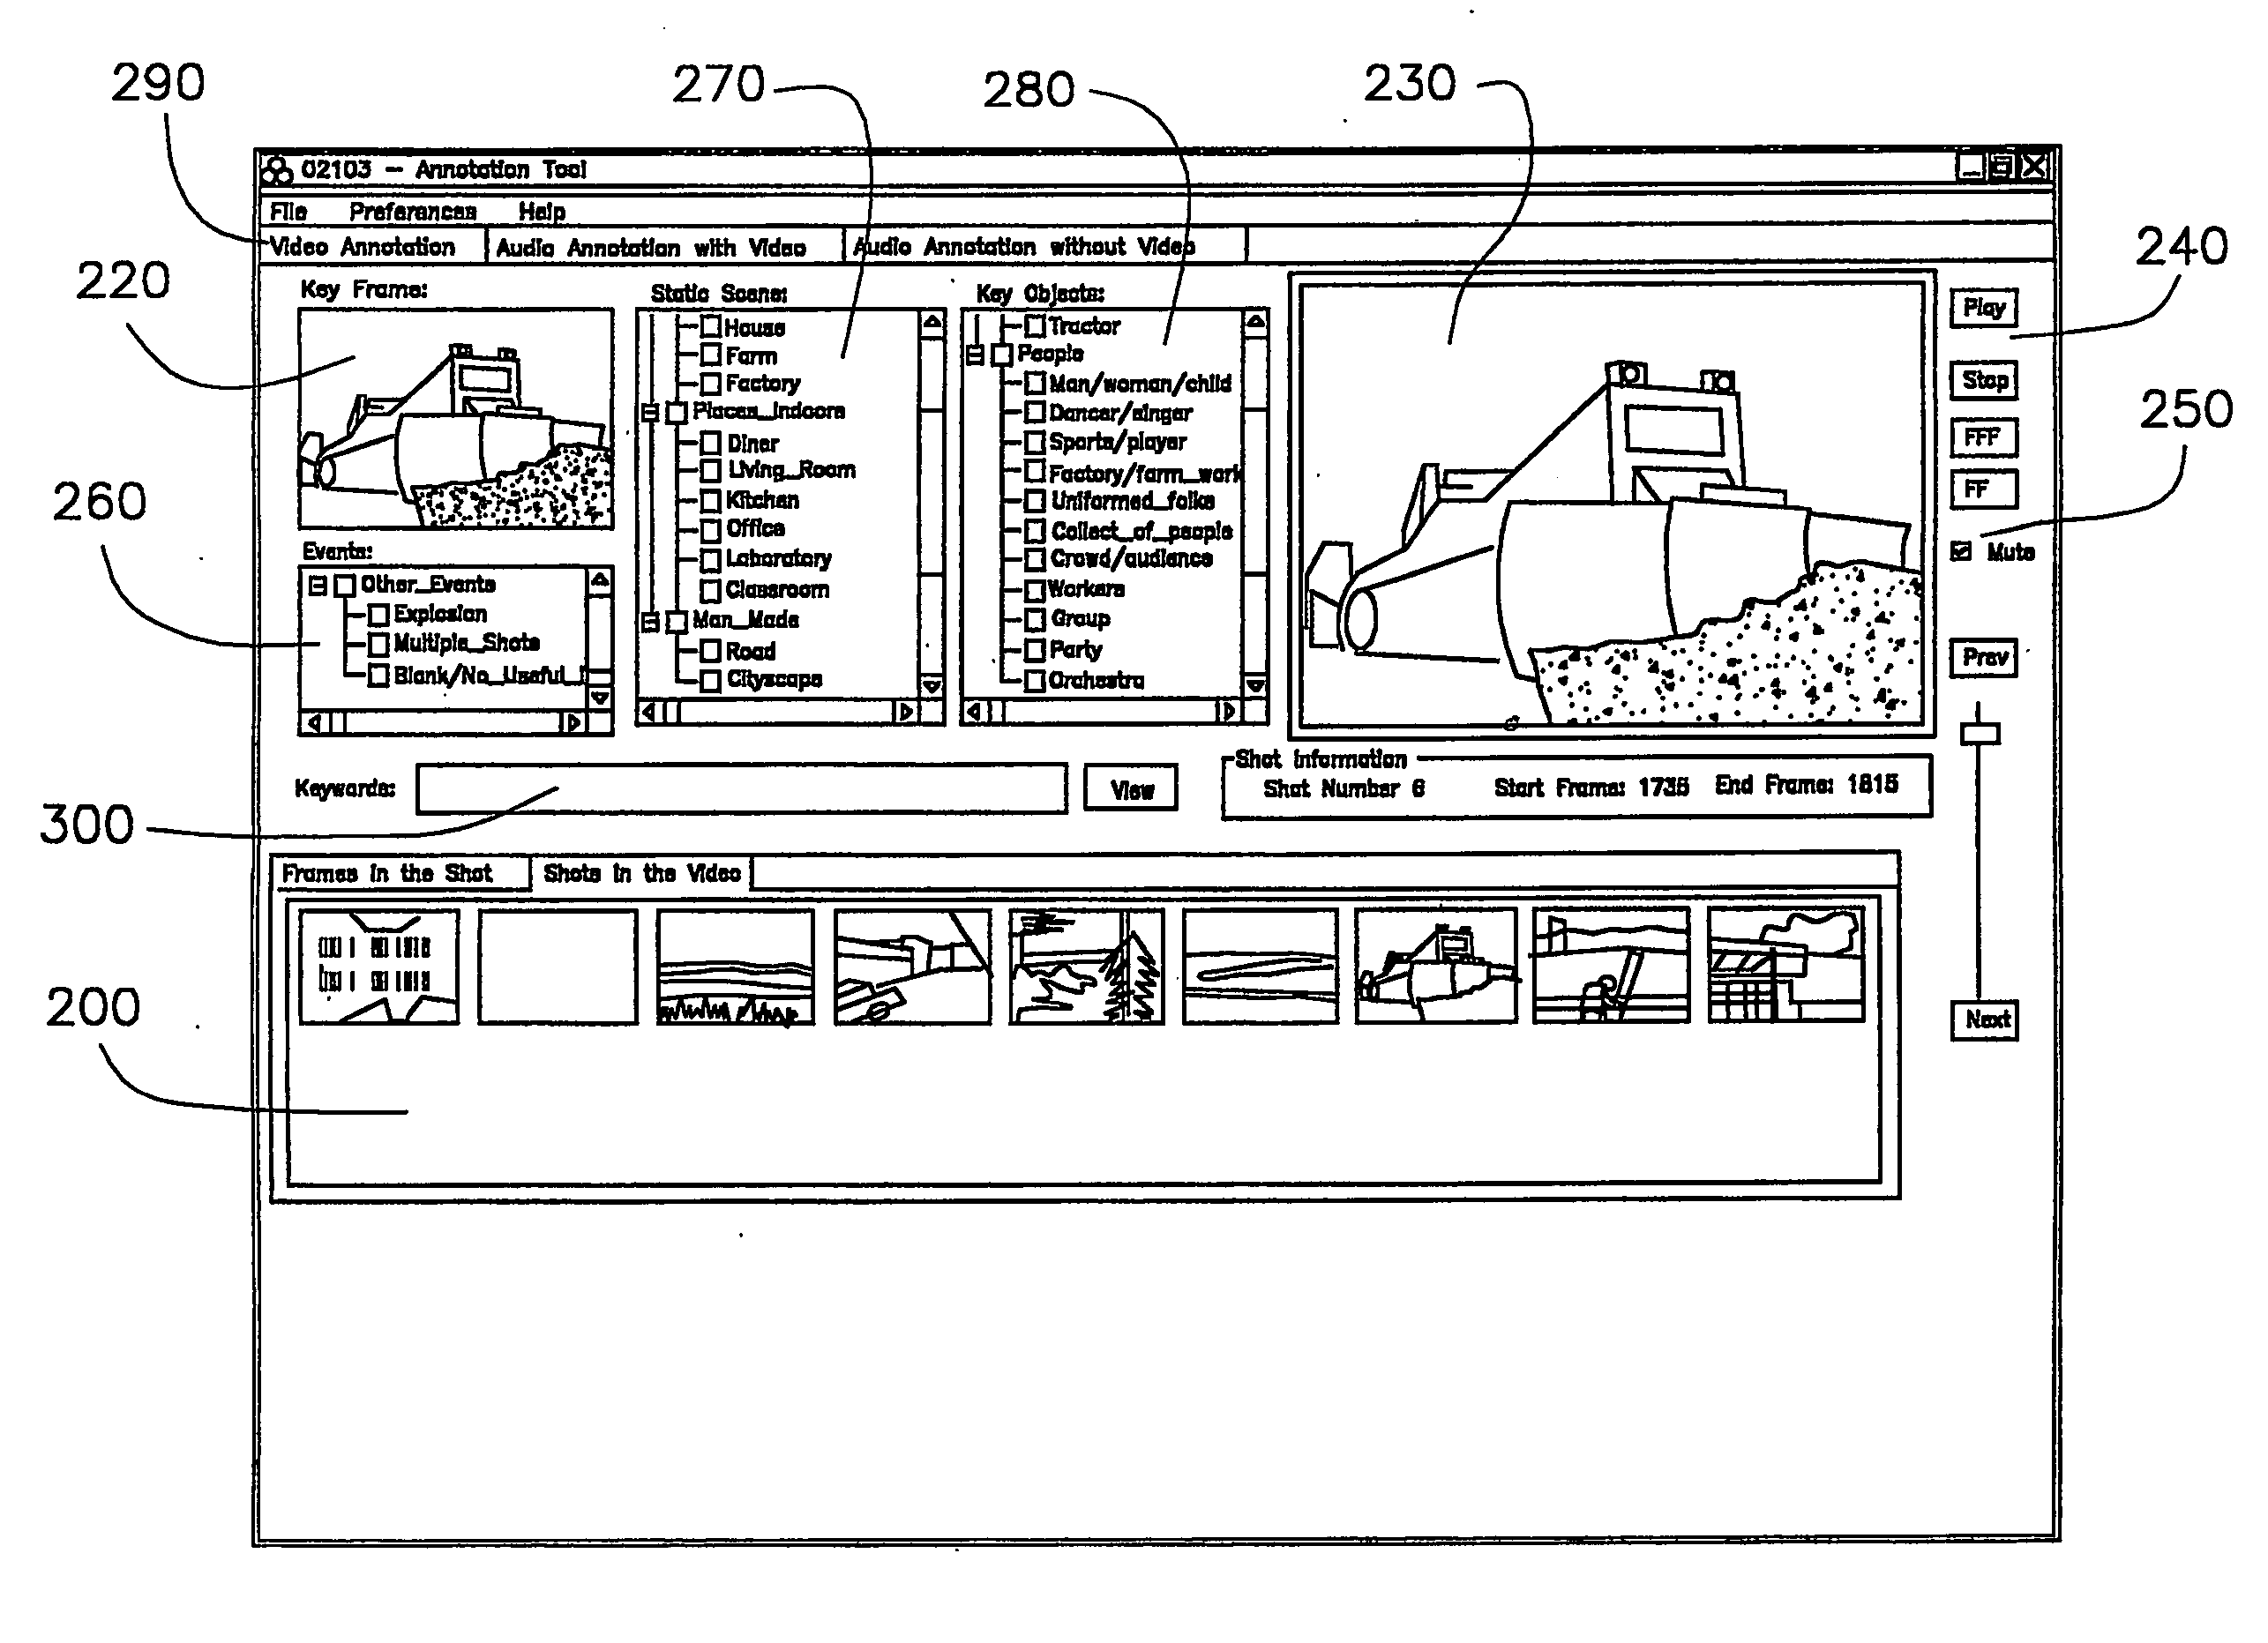 System and method for annotating multi-modal characteristics in multimedia documents